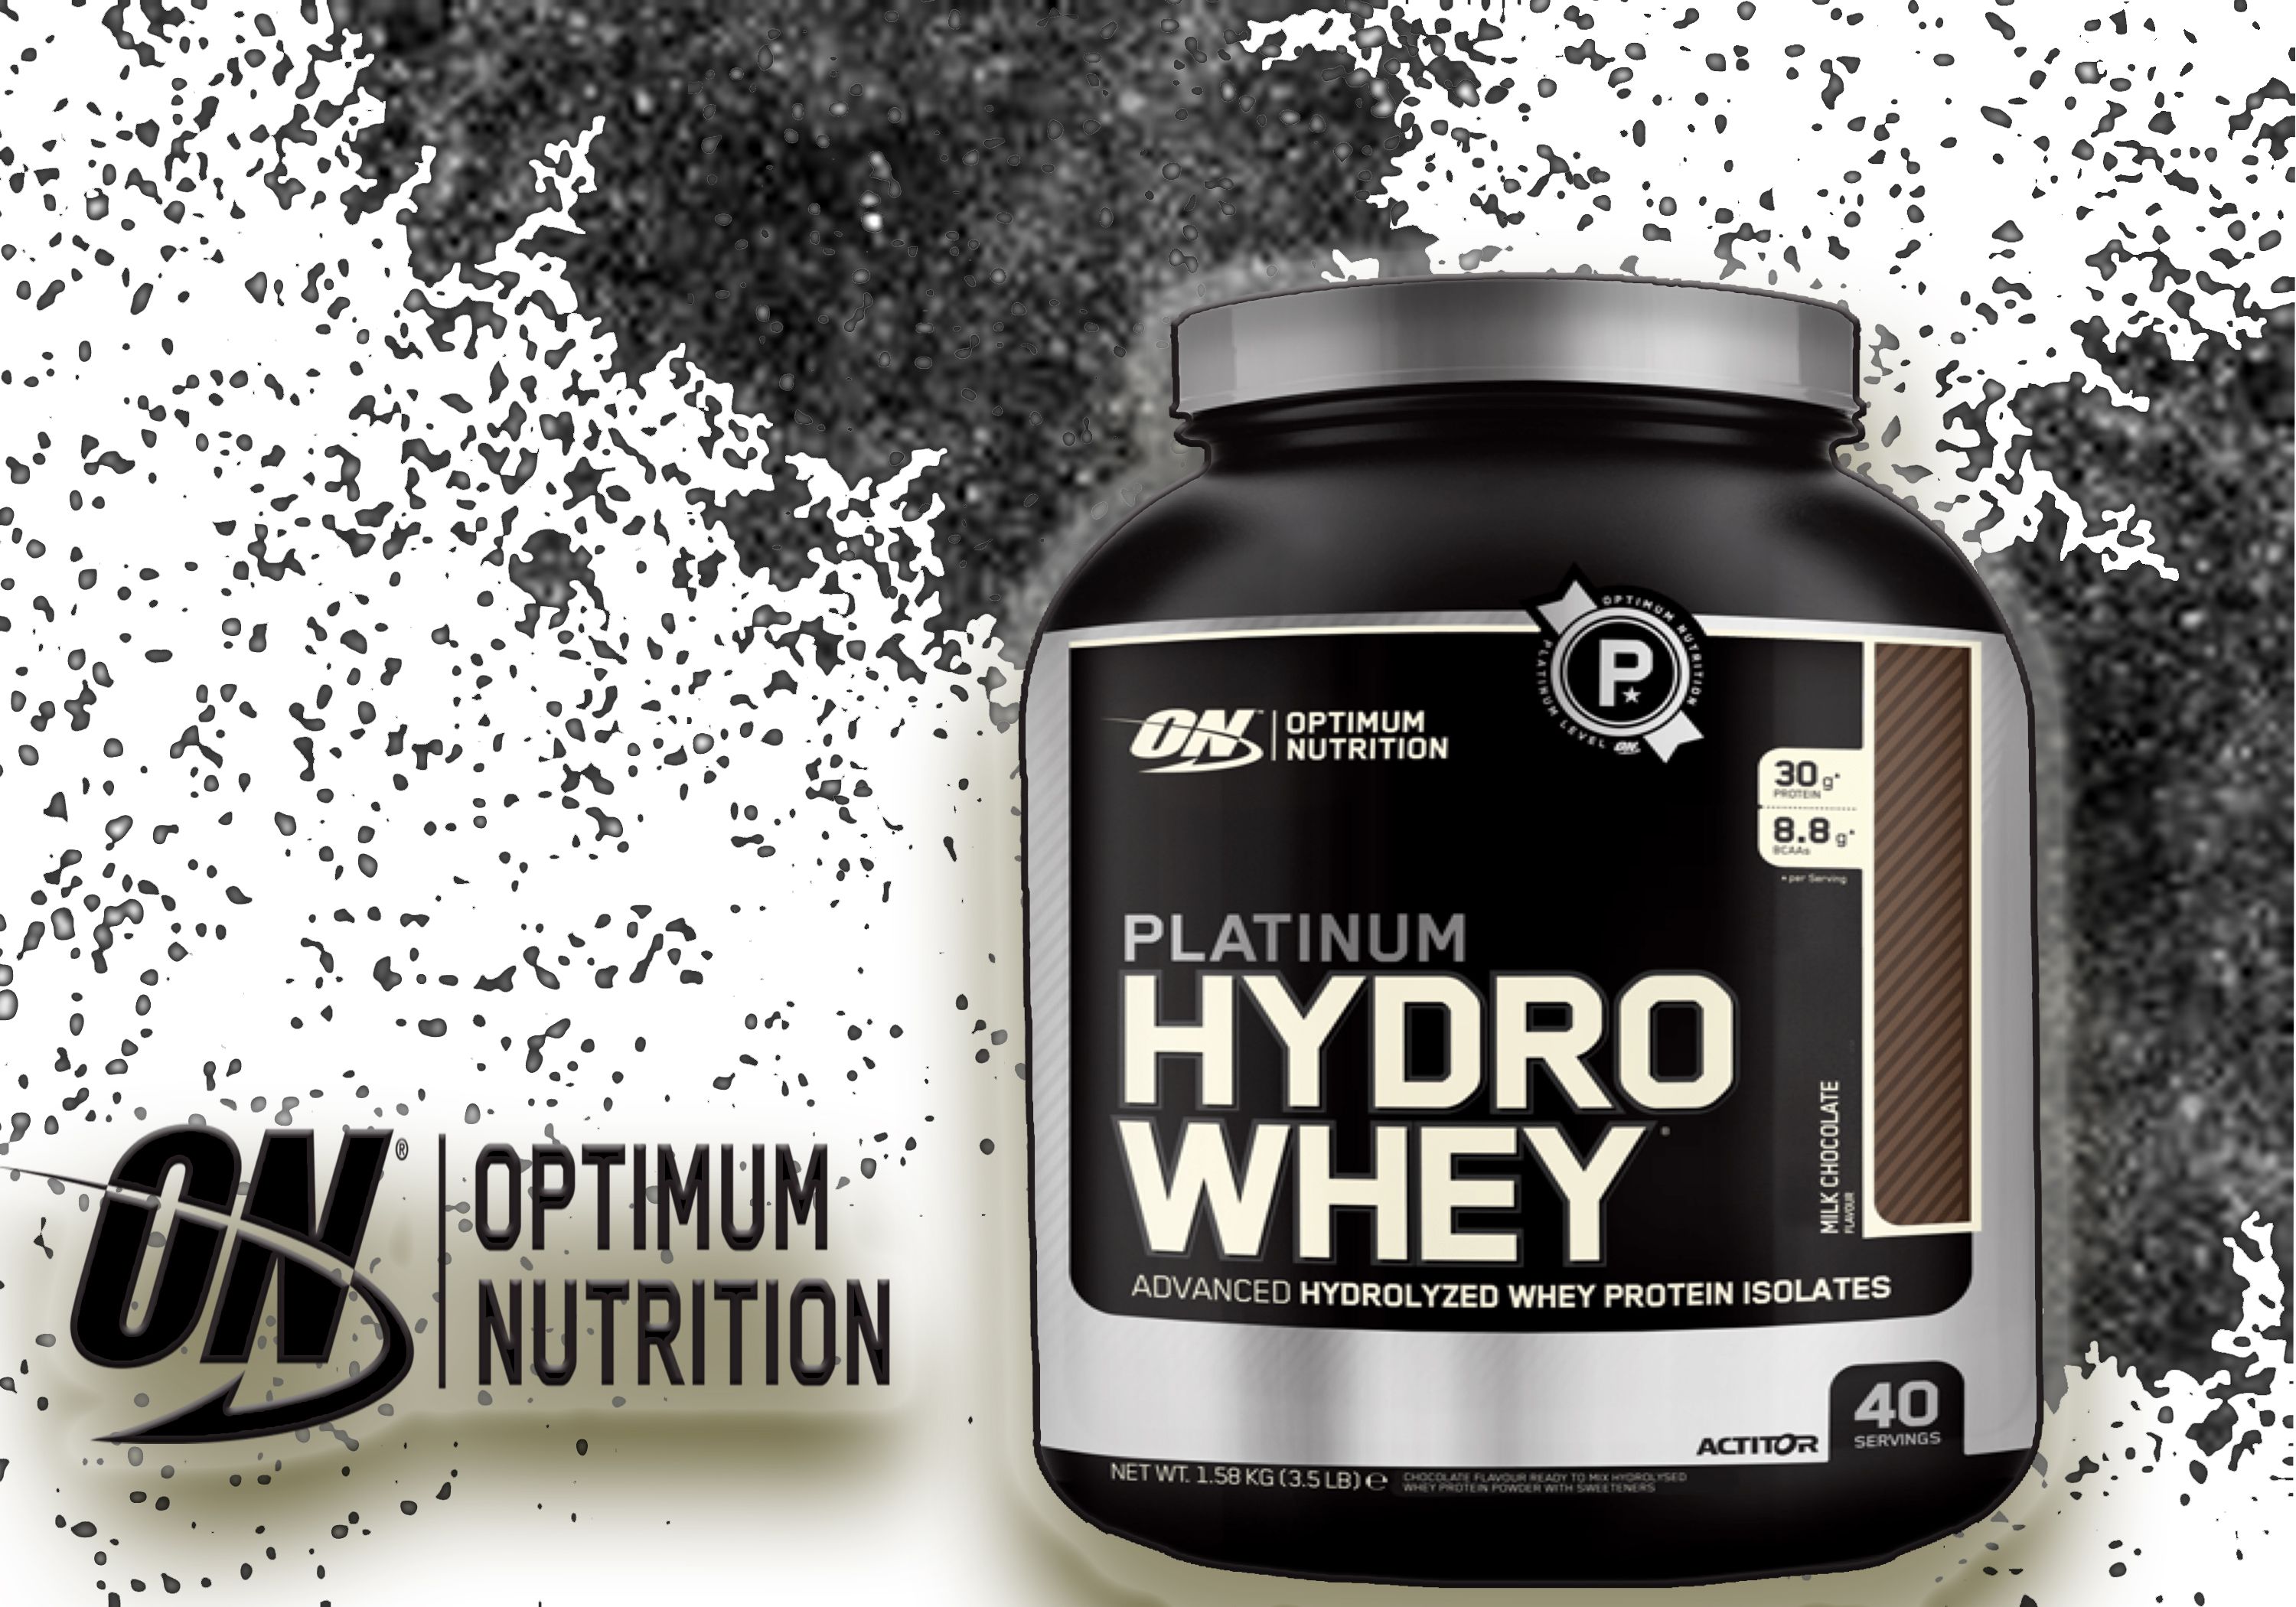 ON hydrowhey 3.5lbs banner or poster.jpg